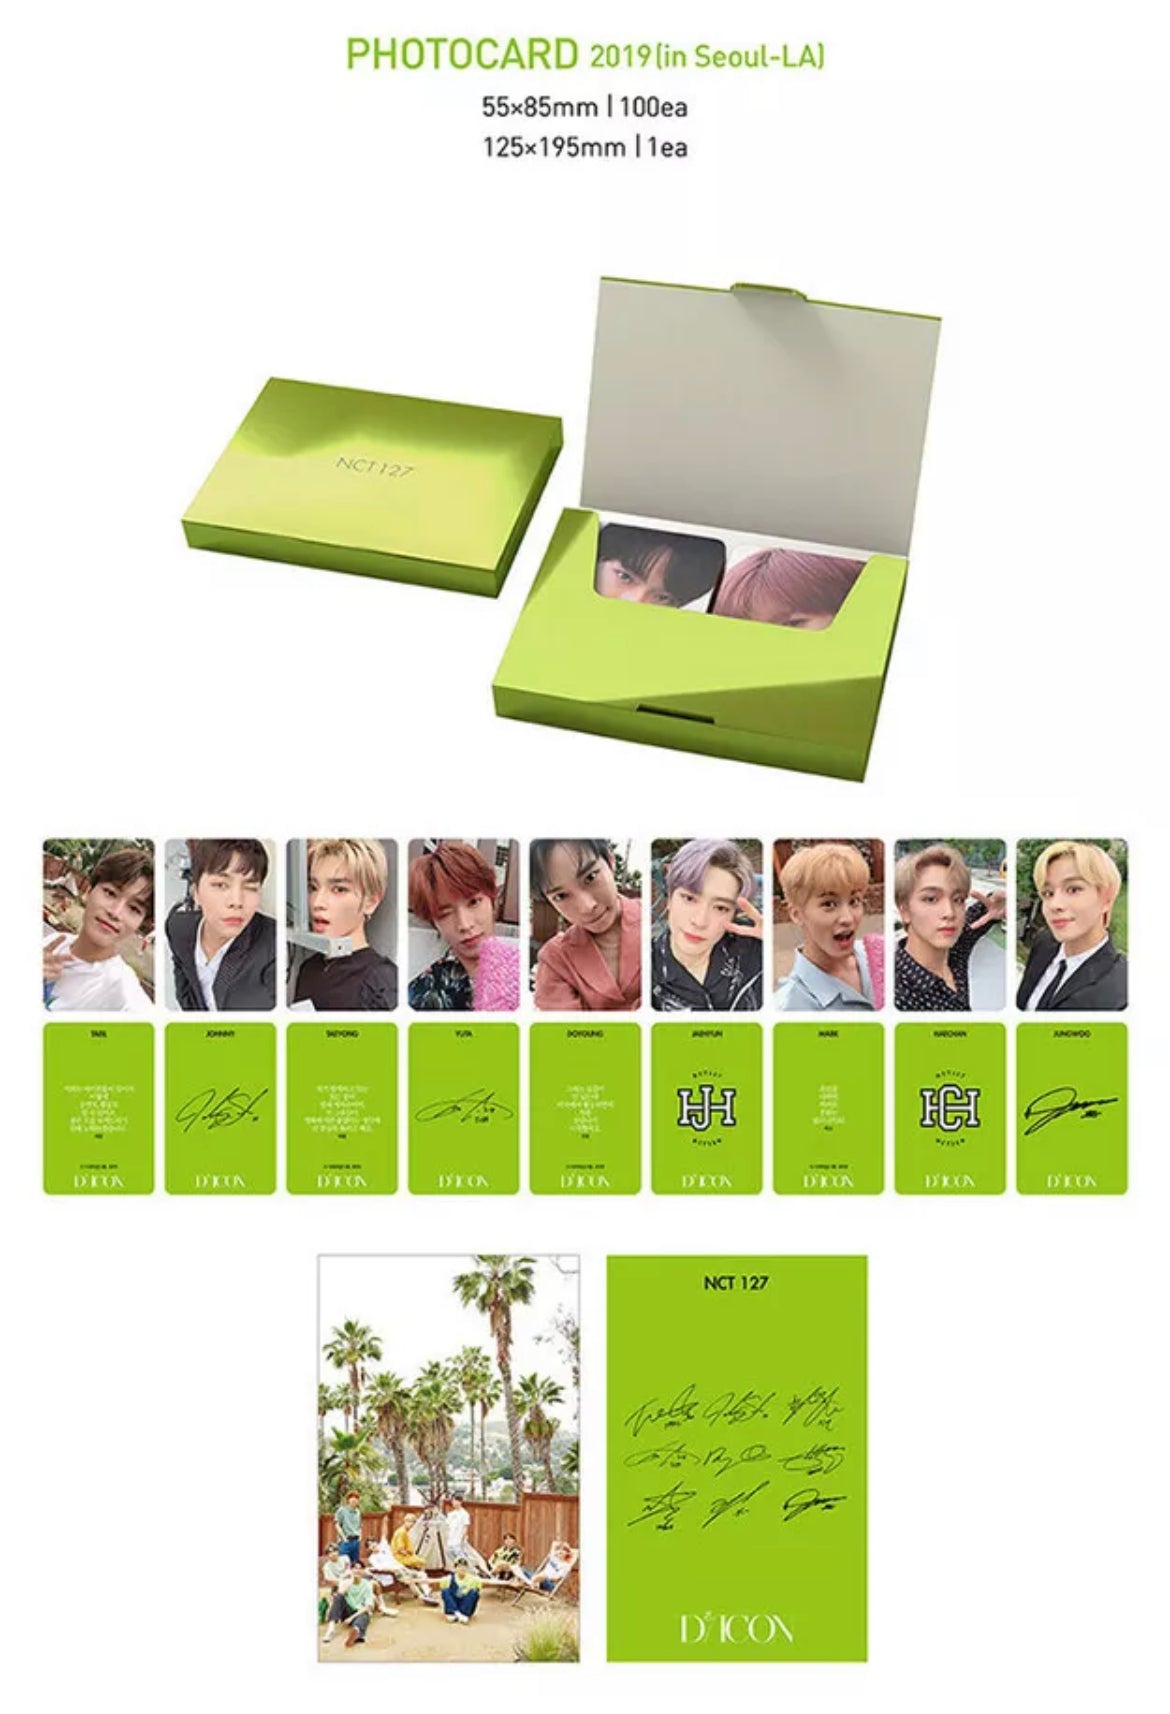 PreOrder NCT 127 DICON PHOTOCARD 101 CUSTOM BOOK BEHIND CITY of ANGEL NCT 127